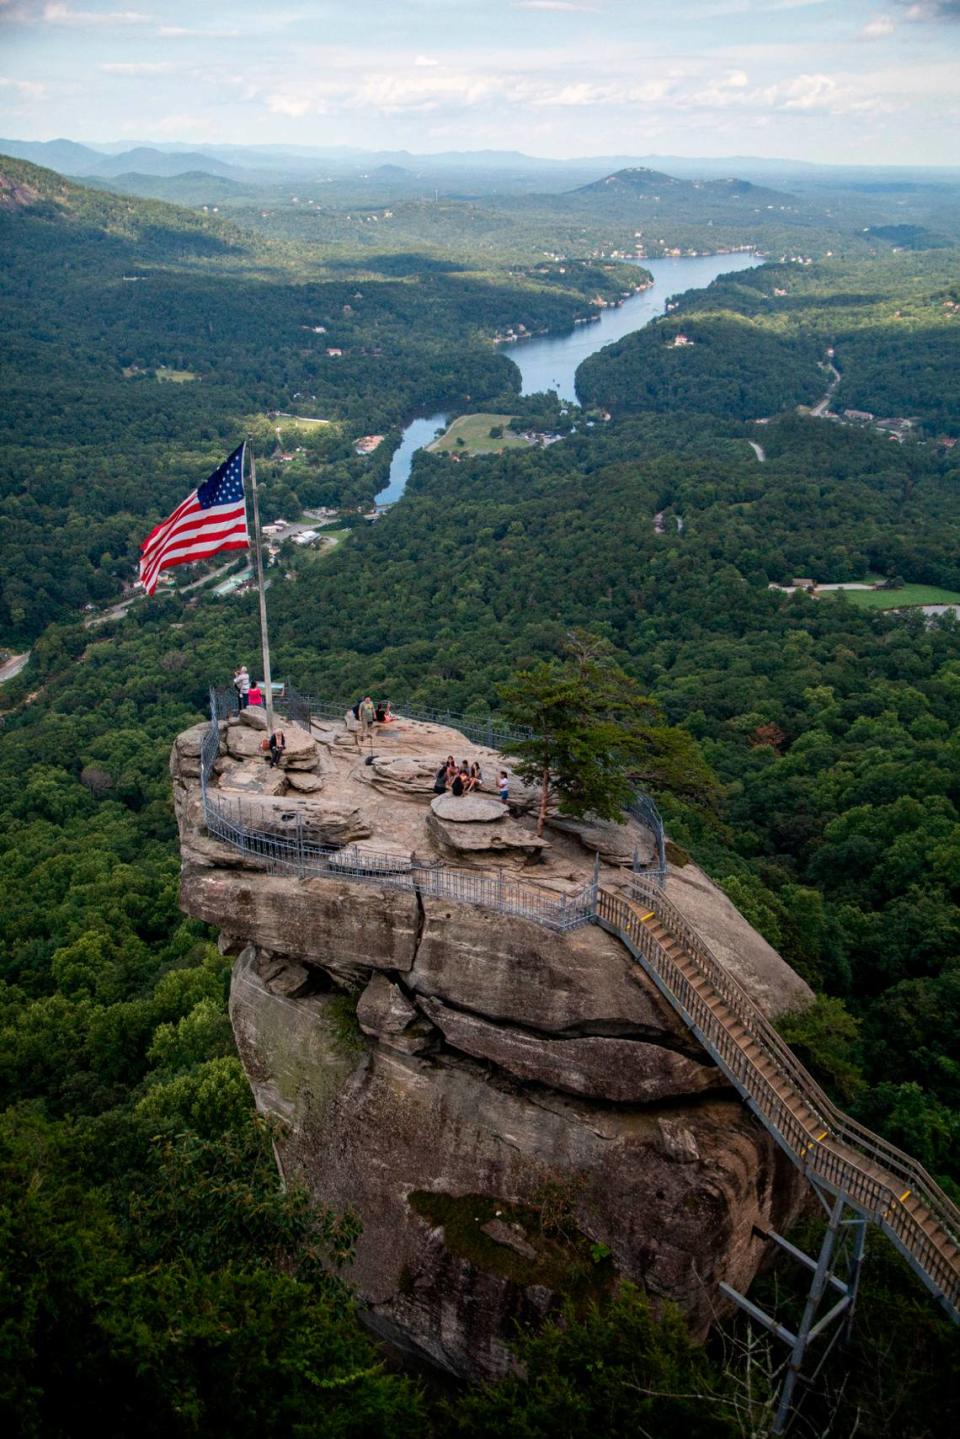 Visitors atop Chimney Rock get a view of Hickory Nut Gorge and Lake Lure at Chimney Rock State Park.